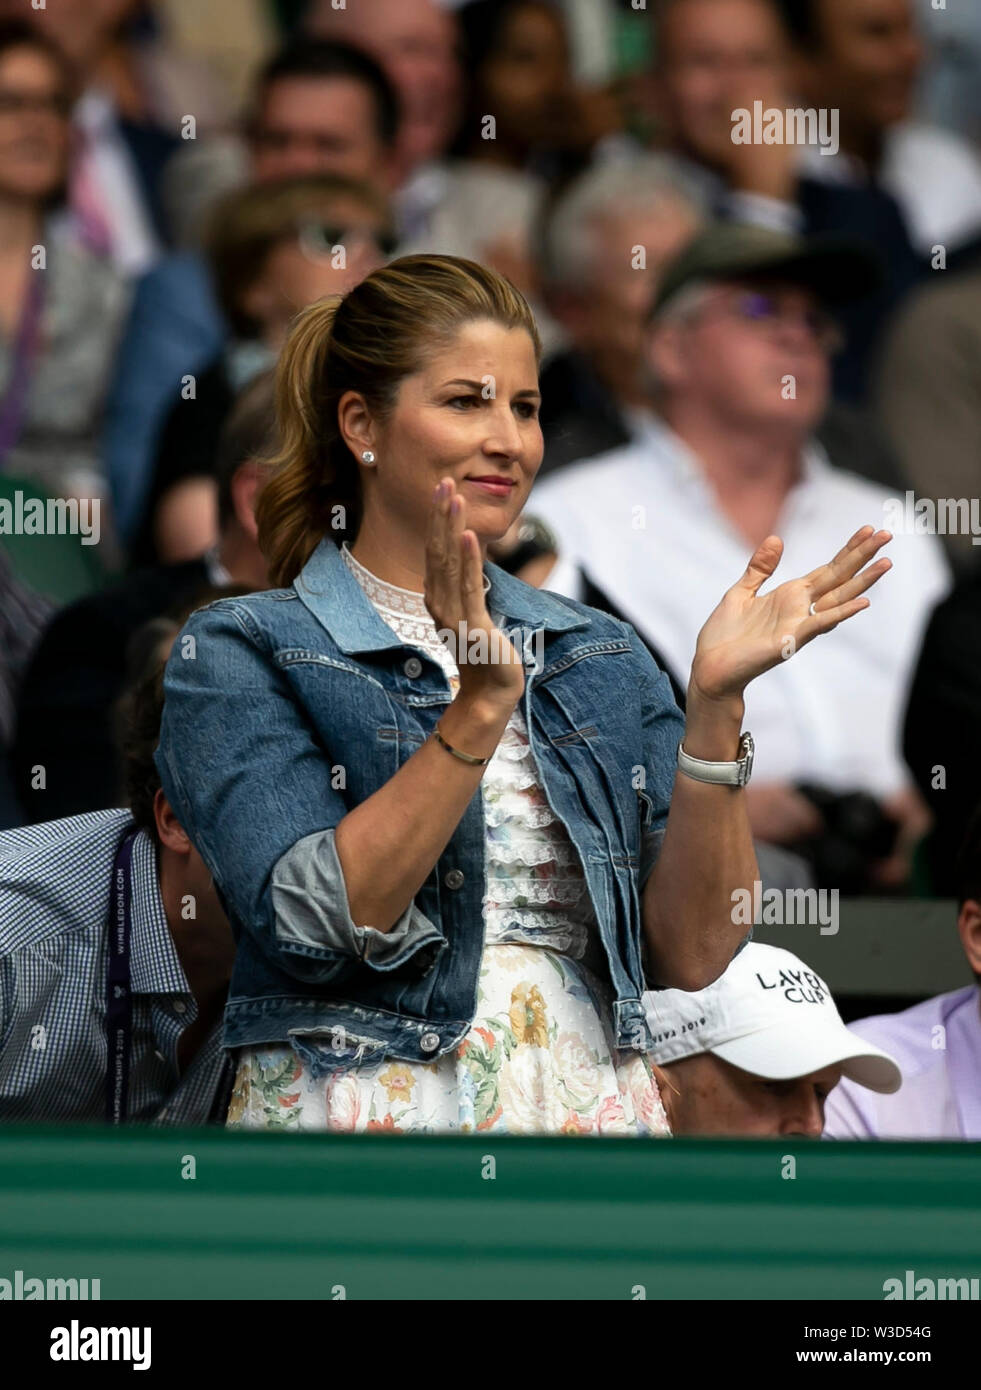 London, Britain. 14th July, 2019. Mirka Federer, wife of Roger Federer of  Switzerland is seen during the men's singles final match between Roger  Federer of Switzerland and Novak Djokovic of Serbia at